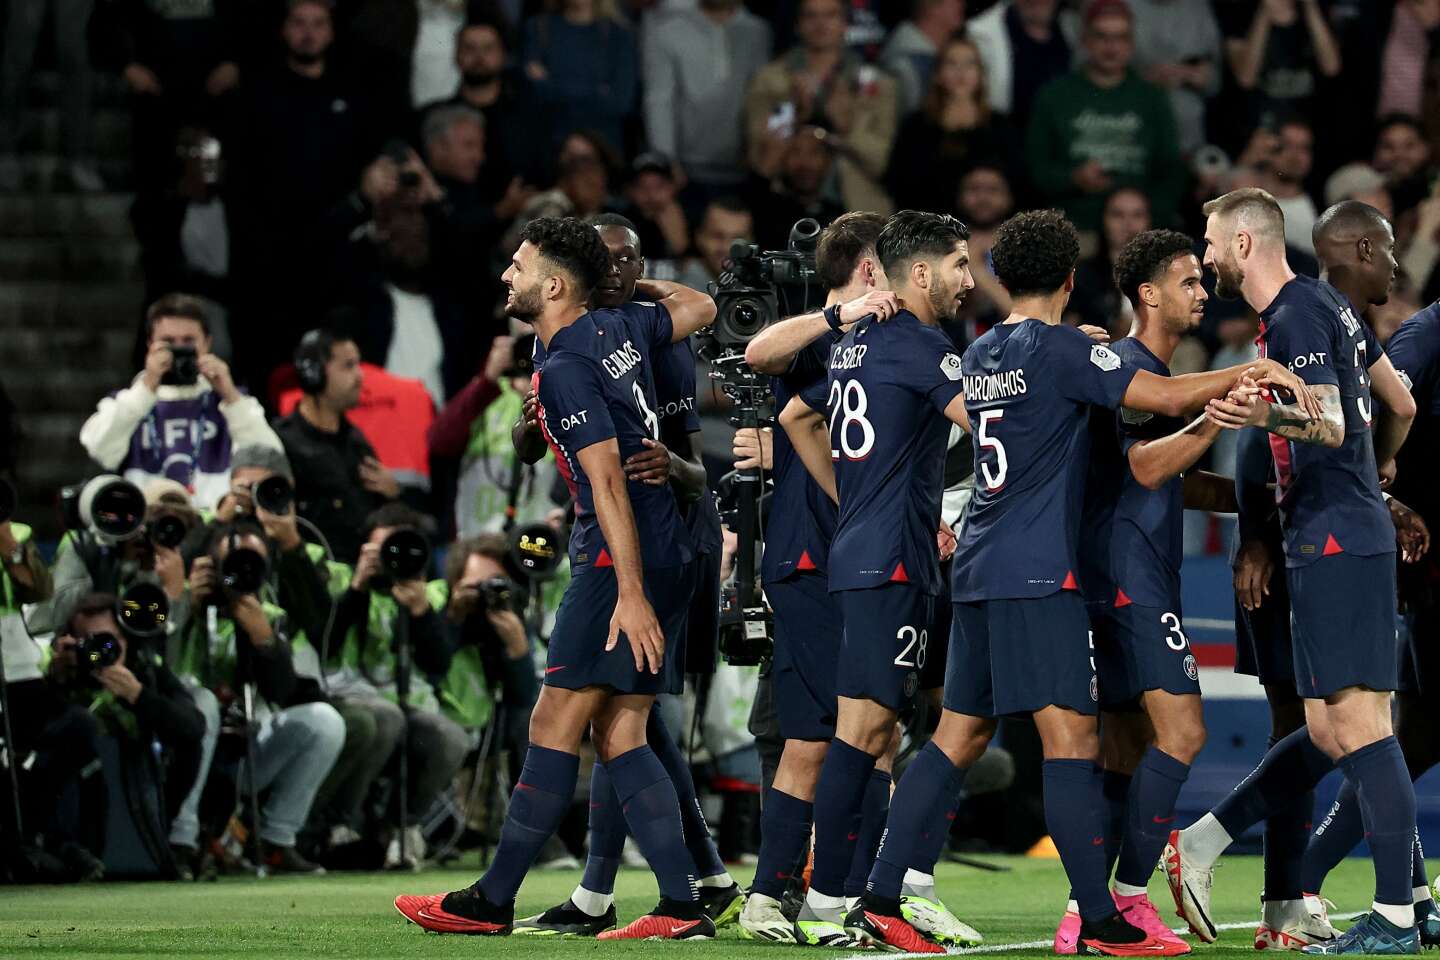 for homophobic chants, PSG and four of its players summoned by the Professional Football League